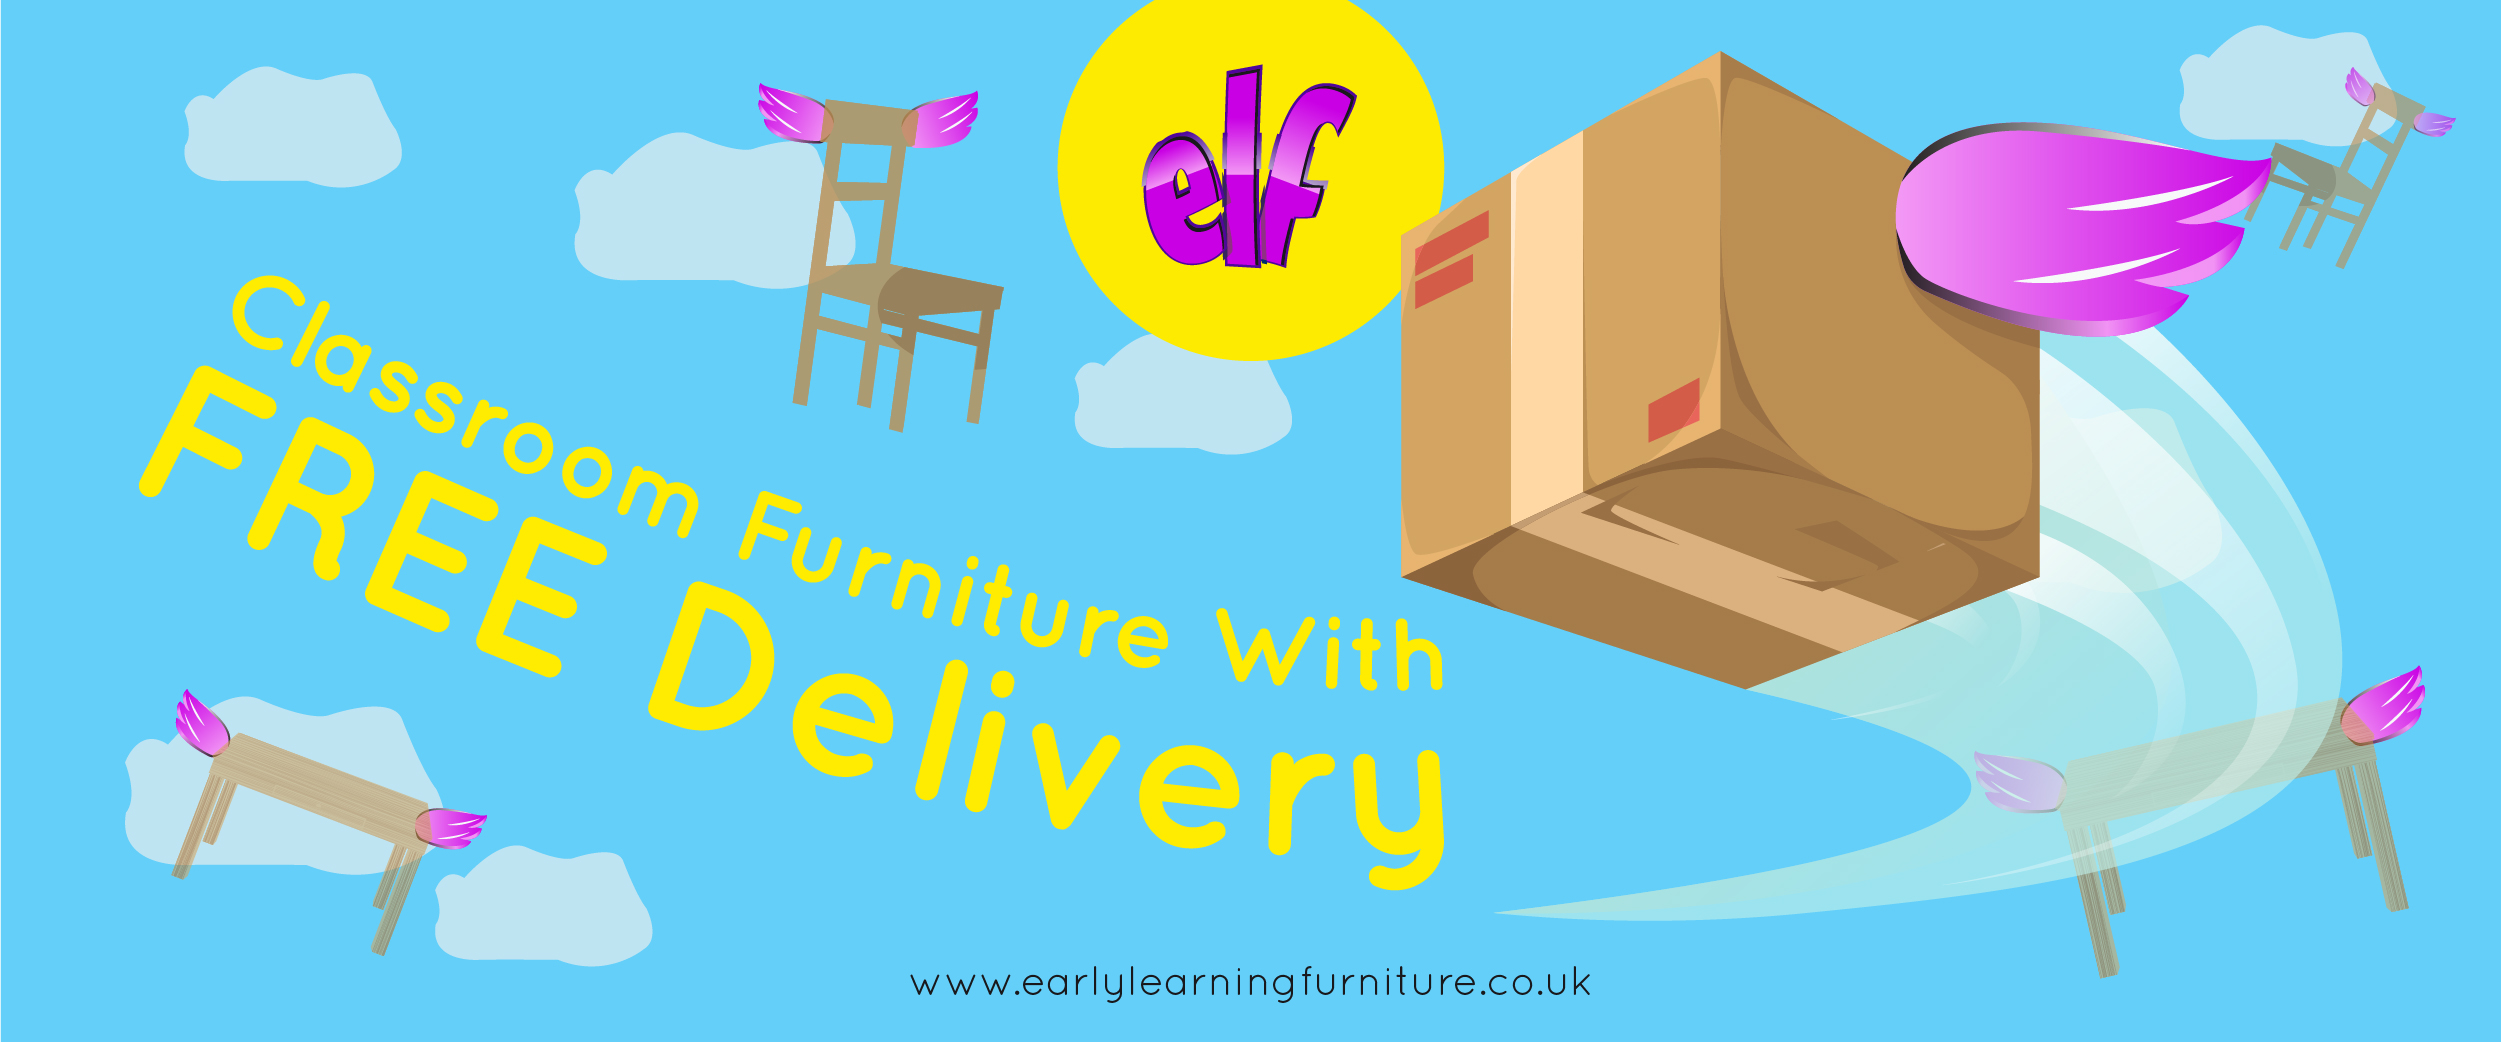 Classroom Furniture with Free Delivery